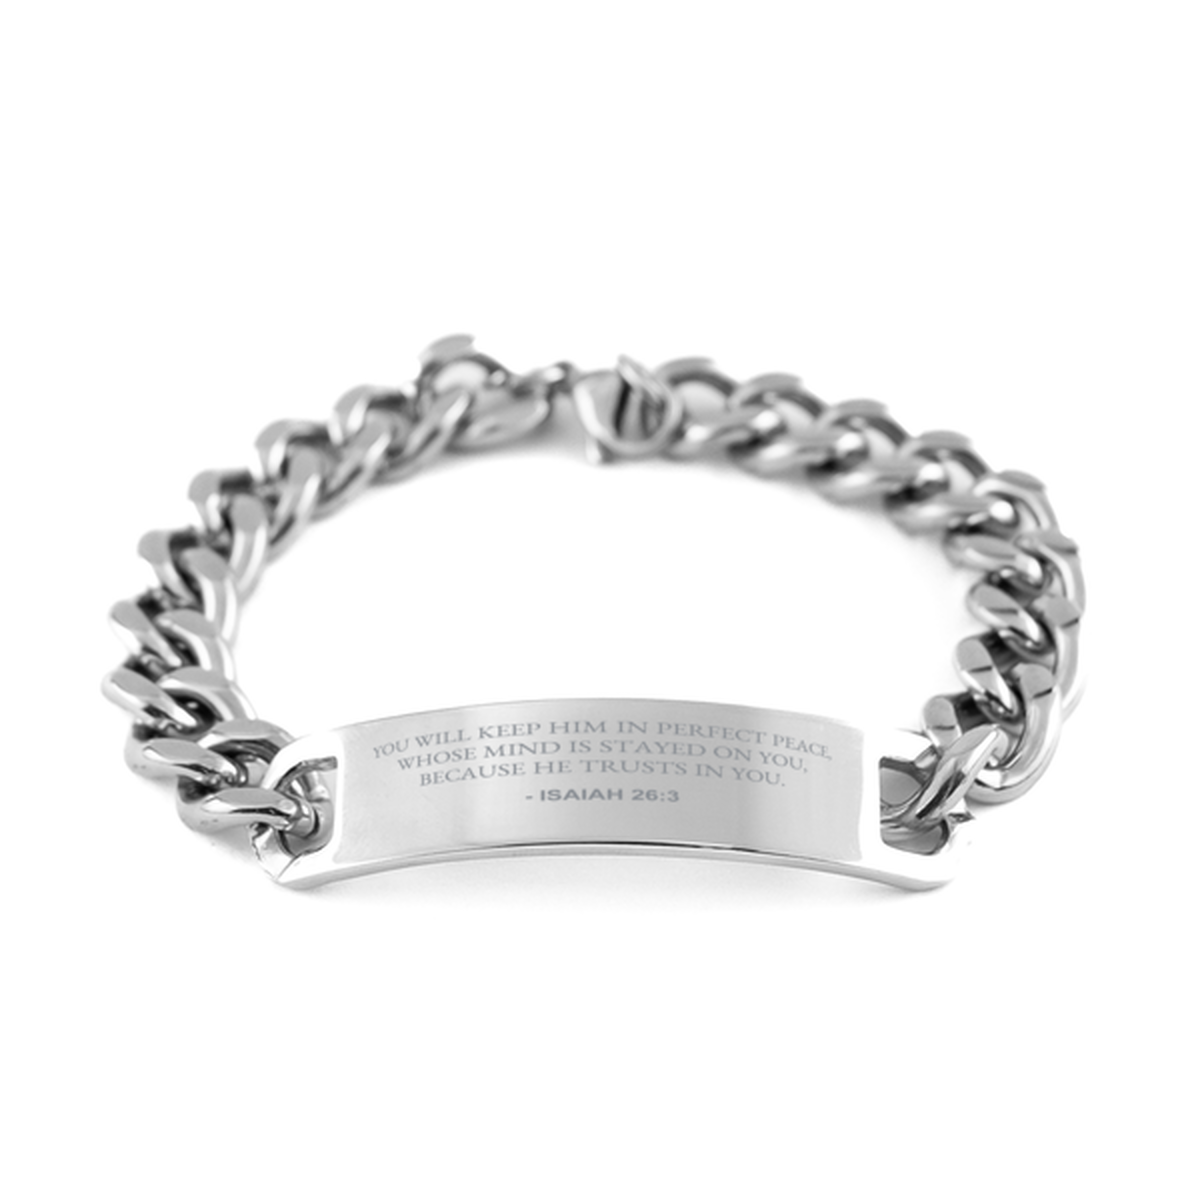 Bible Verse Chain Stainless Steel Bracelet, Isaiah 26:3 You Will Keep Him In Perfect Peace, Whose Mind Is, Inspirational Christian Gifts For Men Women